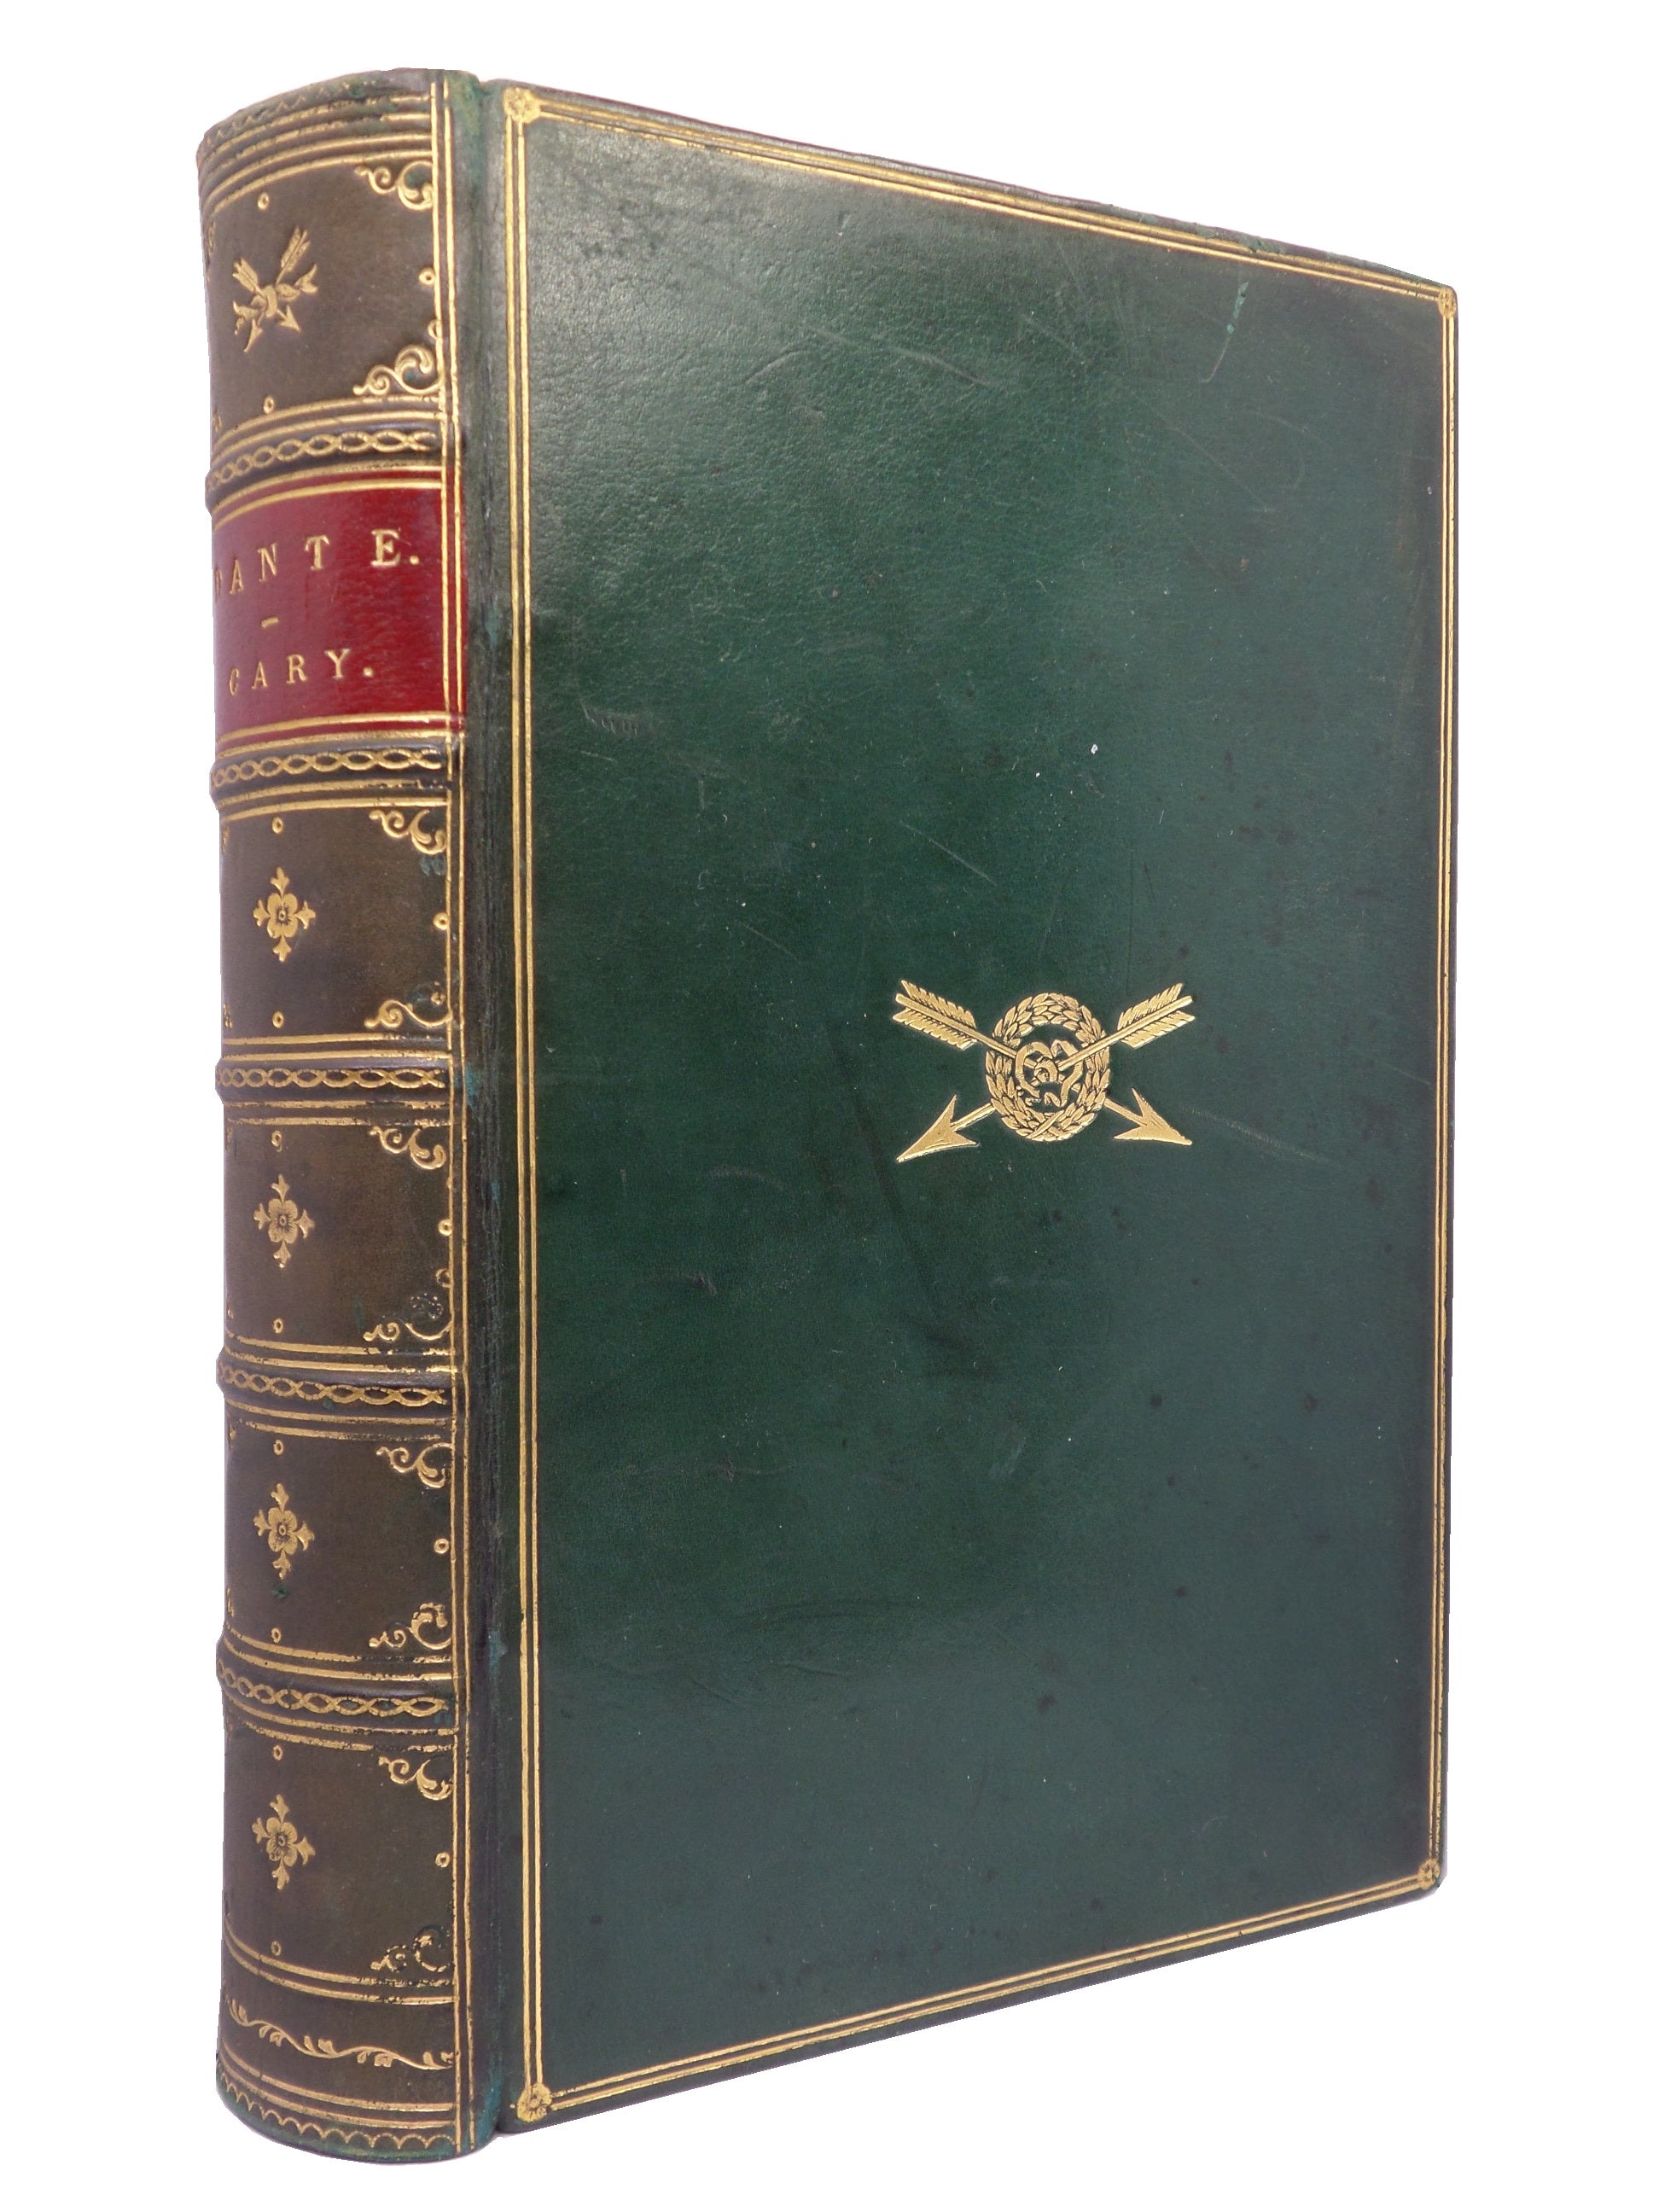 THE VISION; OR, HELL, PURGATORY, AND PARADISE 1870 DANTE ALIGHIERI LEATHER-BOUND